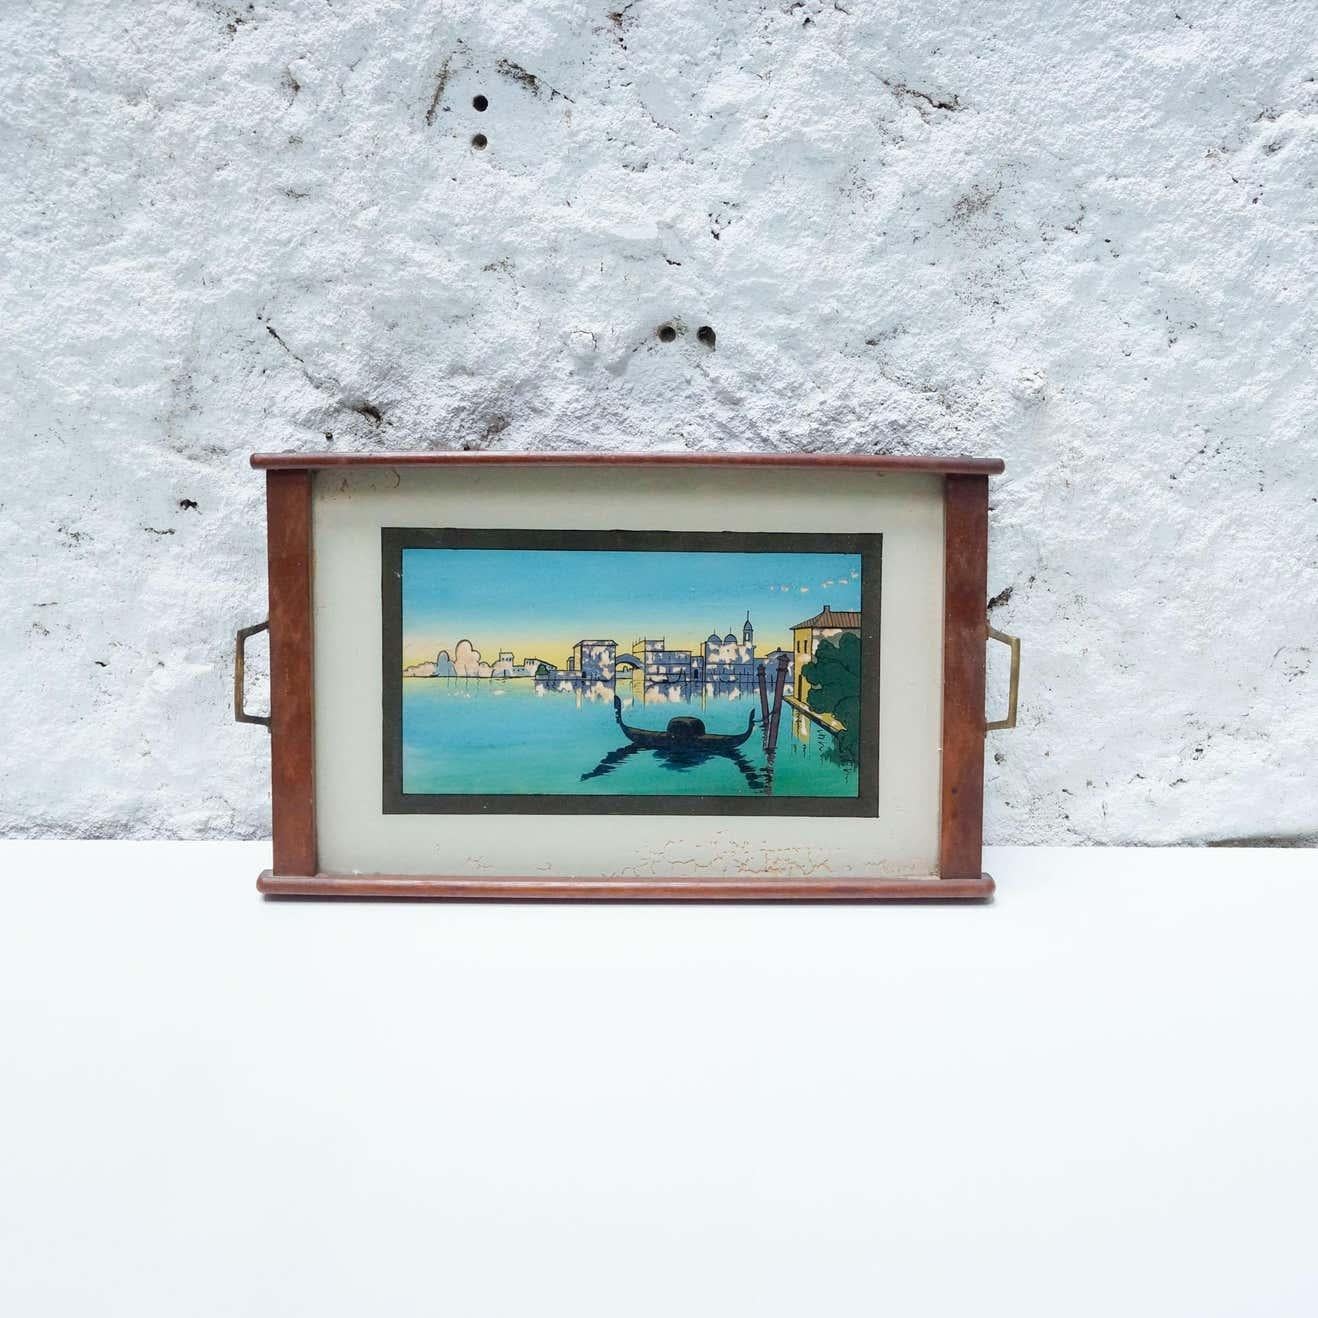 Mid-Century Modern Antique Glass and Wood Tray with Venice Landscape, circa 1930 For Sale